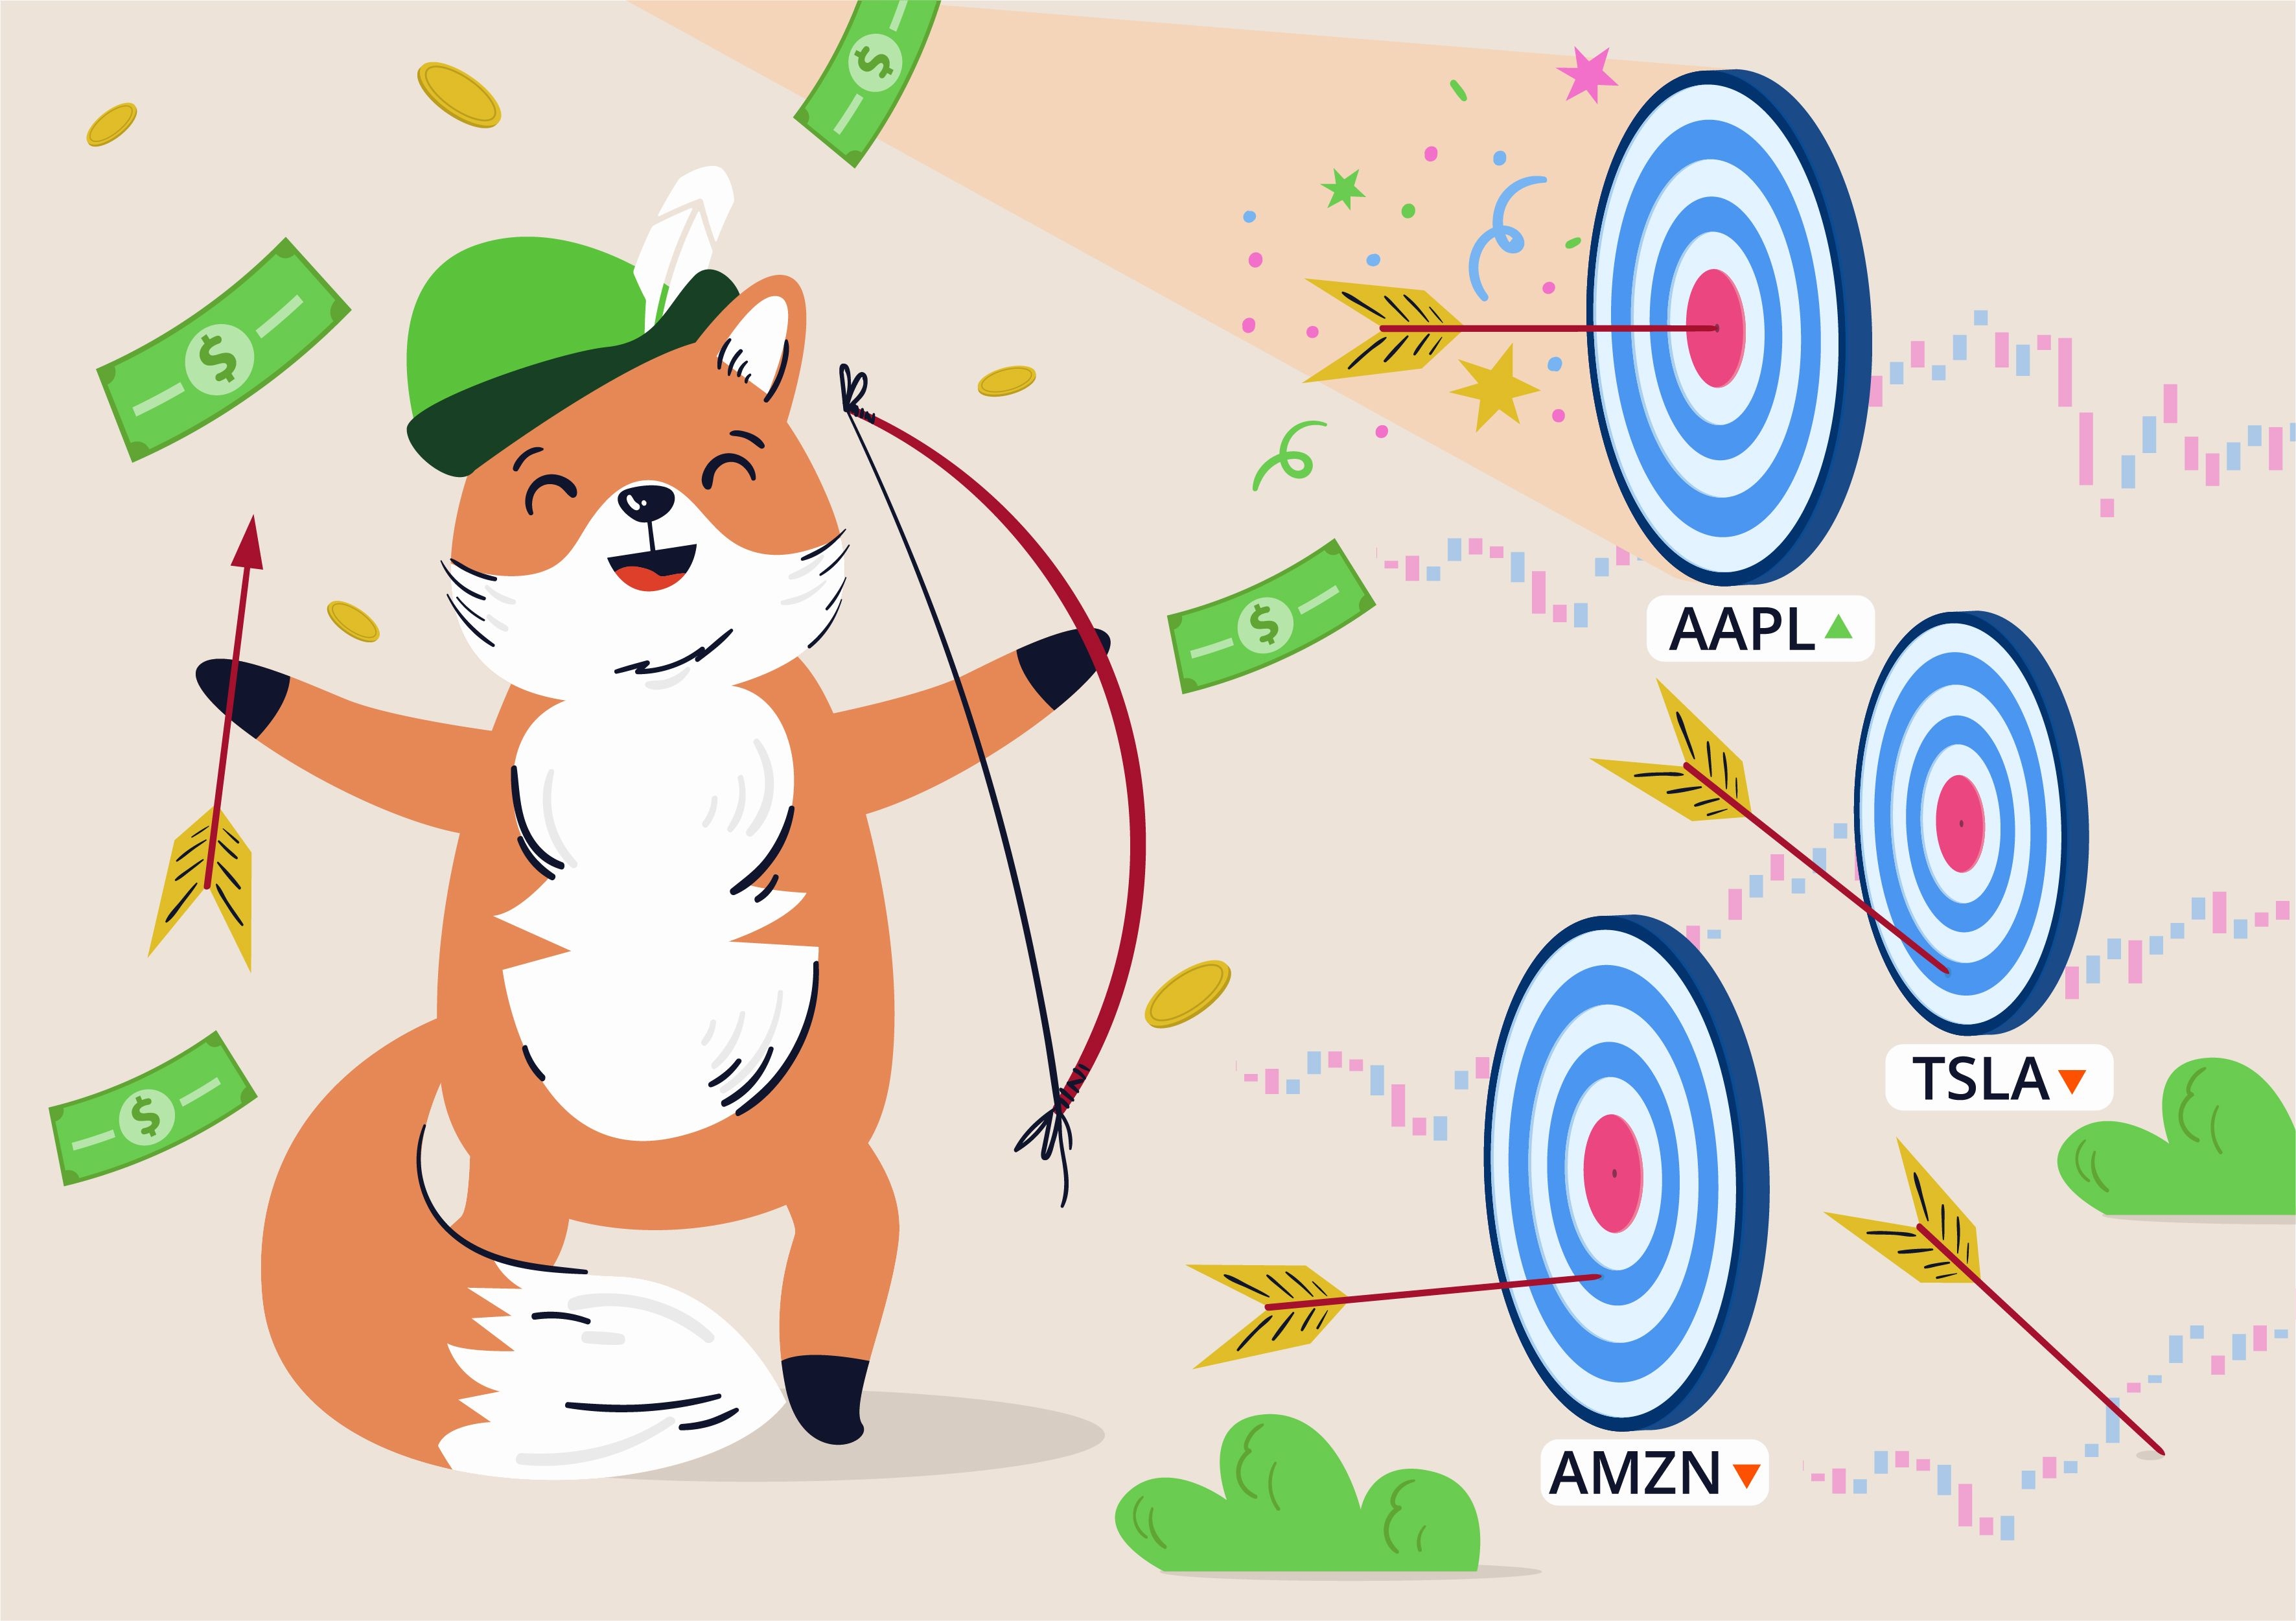 Robinhood rival apps aim to make mobile trading easy for amateur